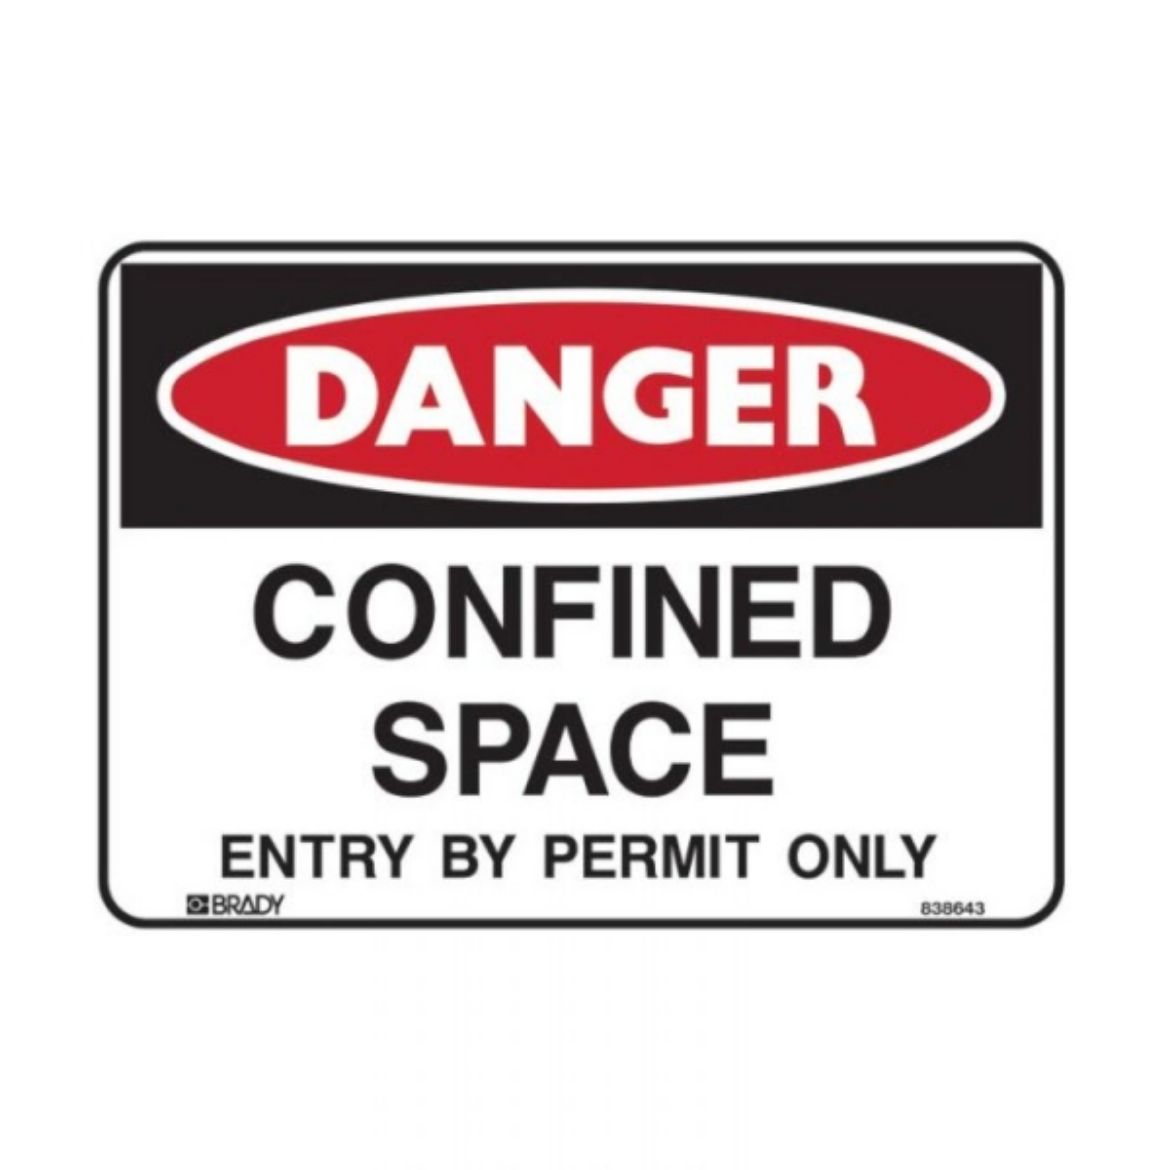 Picture of 838643 - CONFINED SPACE ENTRY BY PERMIT ONLY SIGN 250MM (W) X 180MM (H) SELF ADHESIVE VINYL